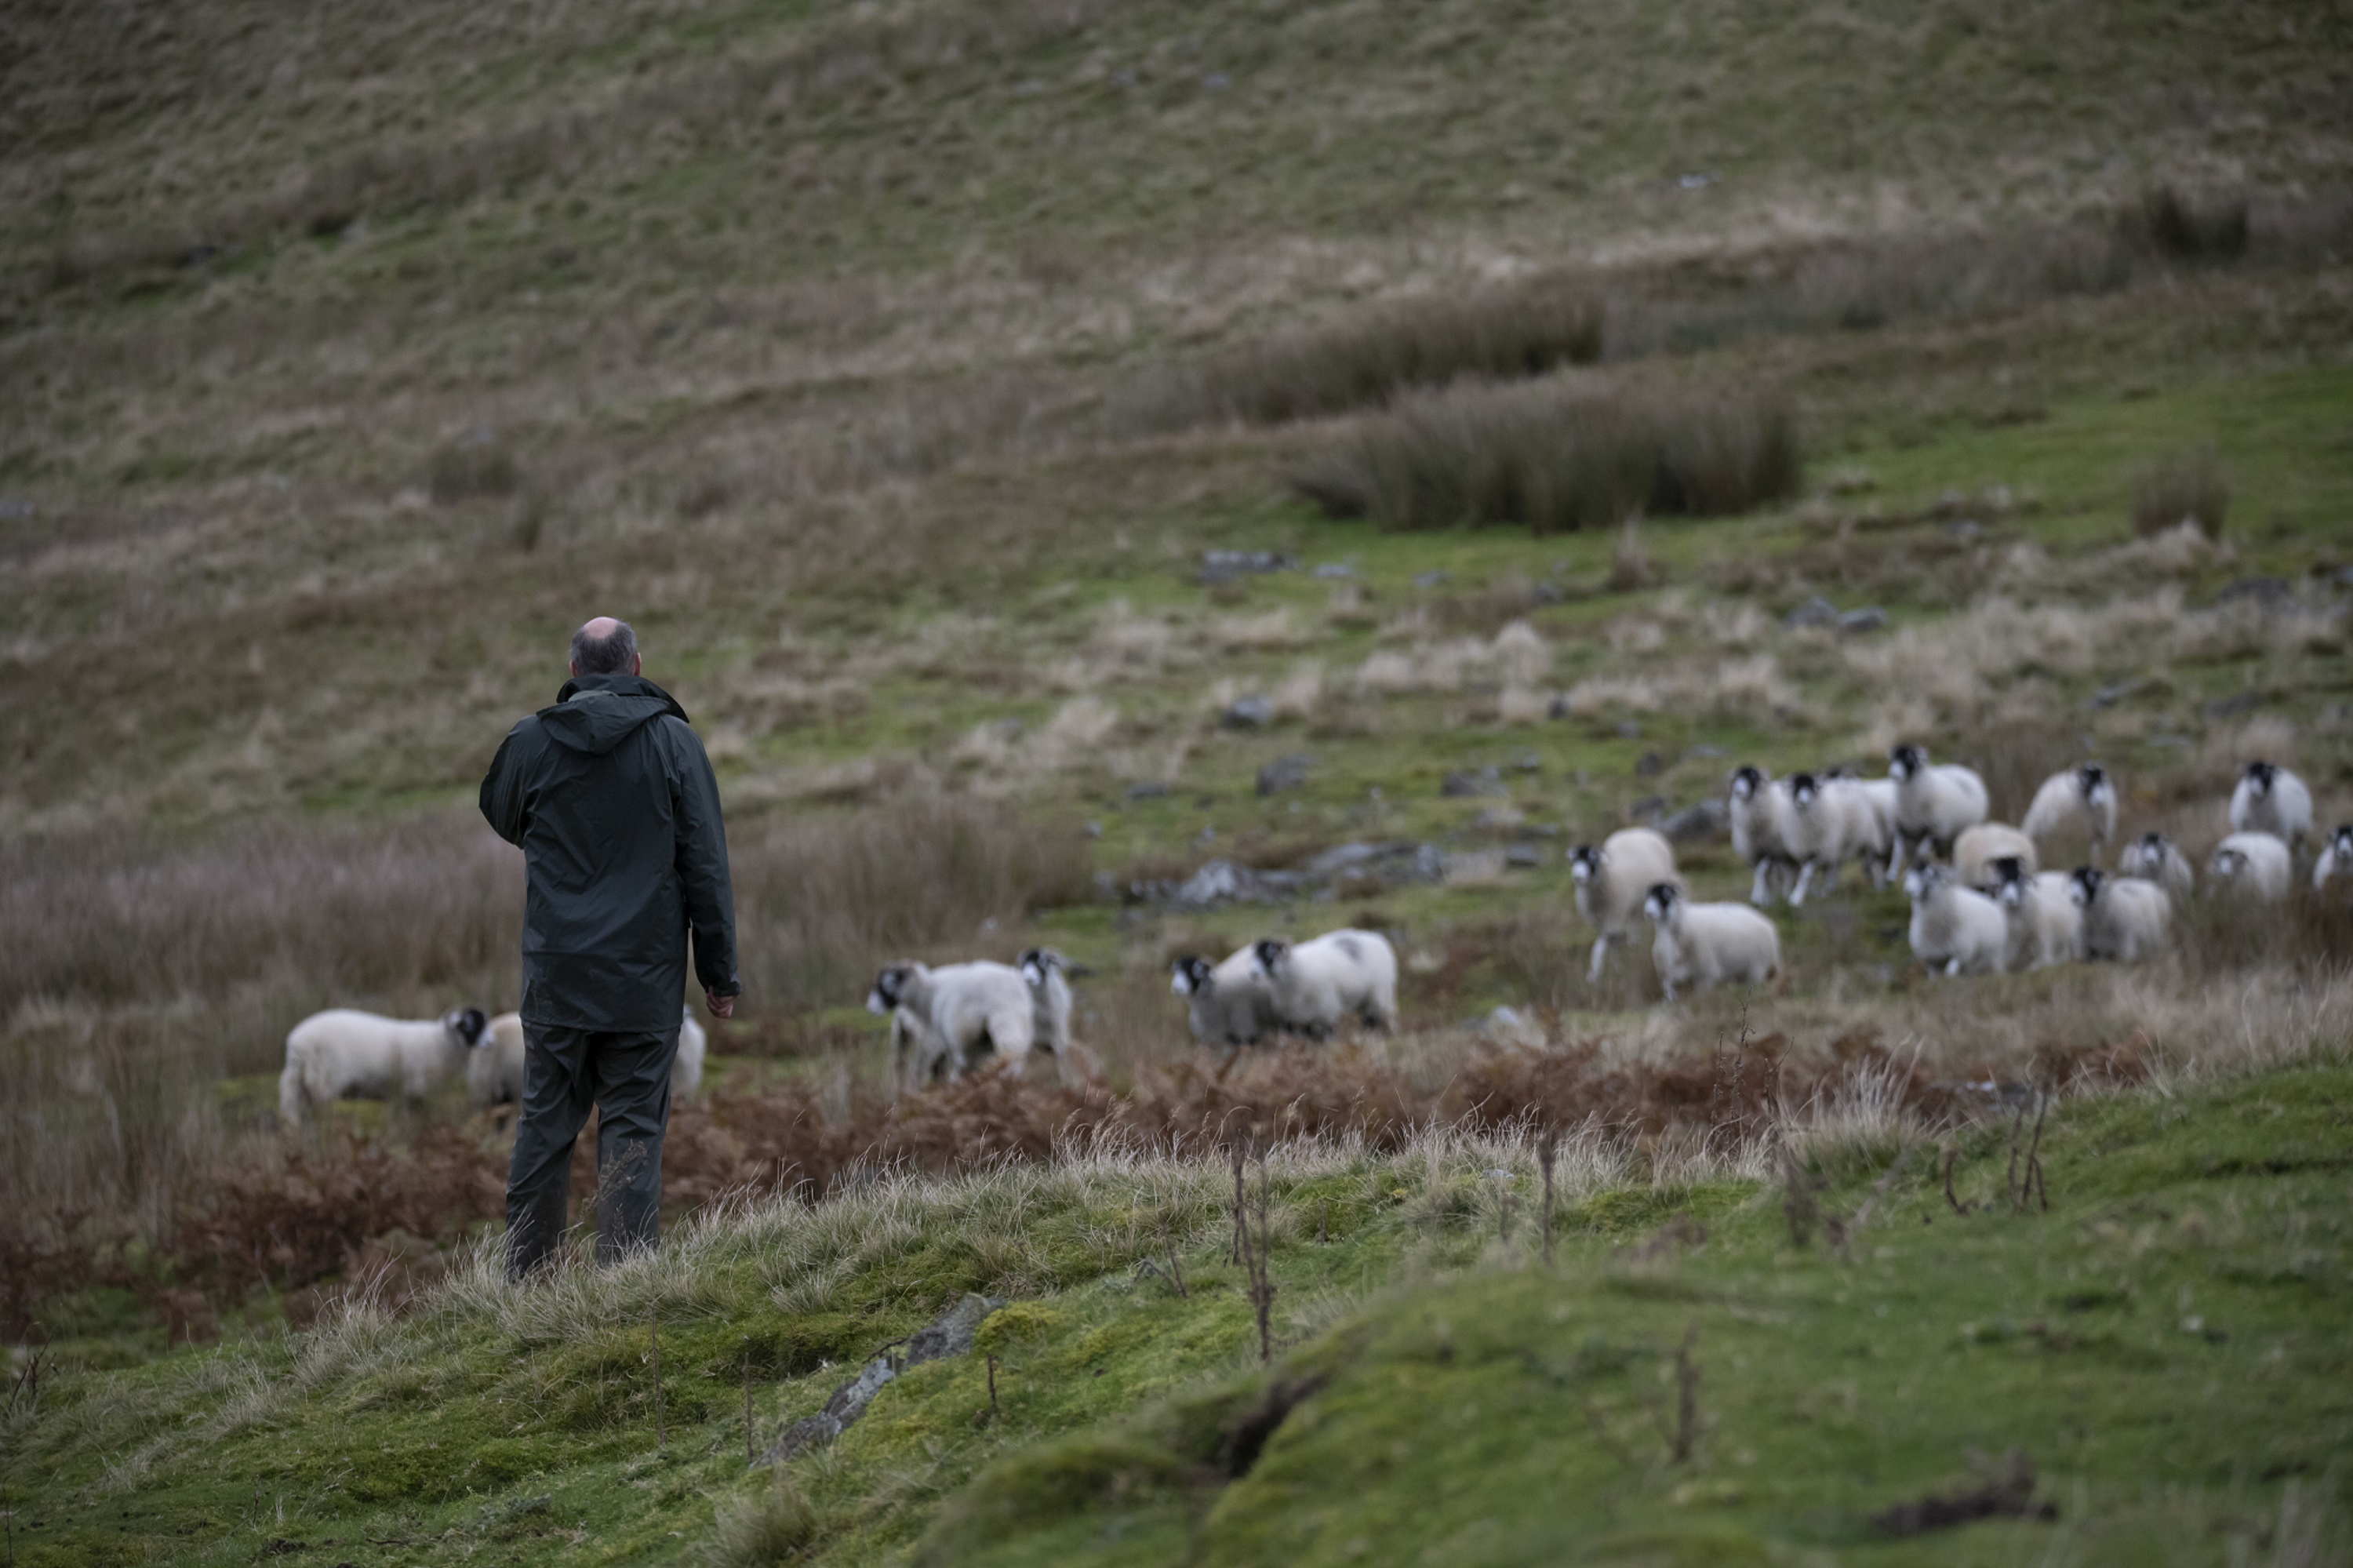 A farmer and sheep in the Arkengarthdale landscape